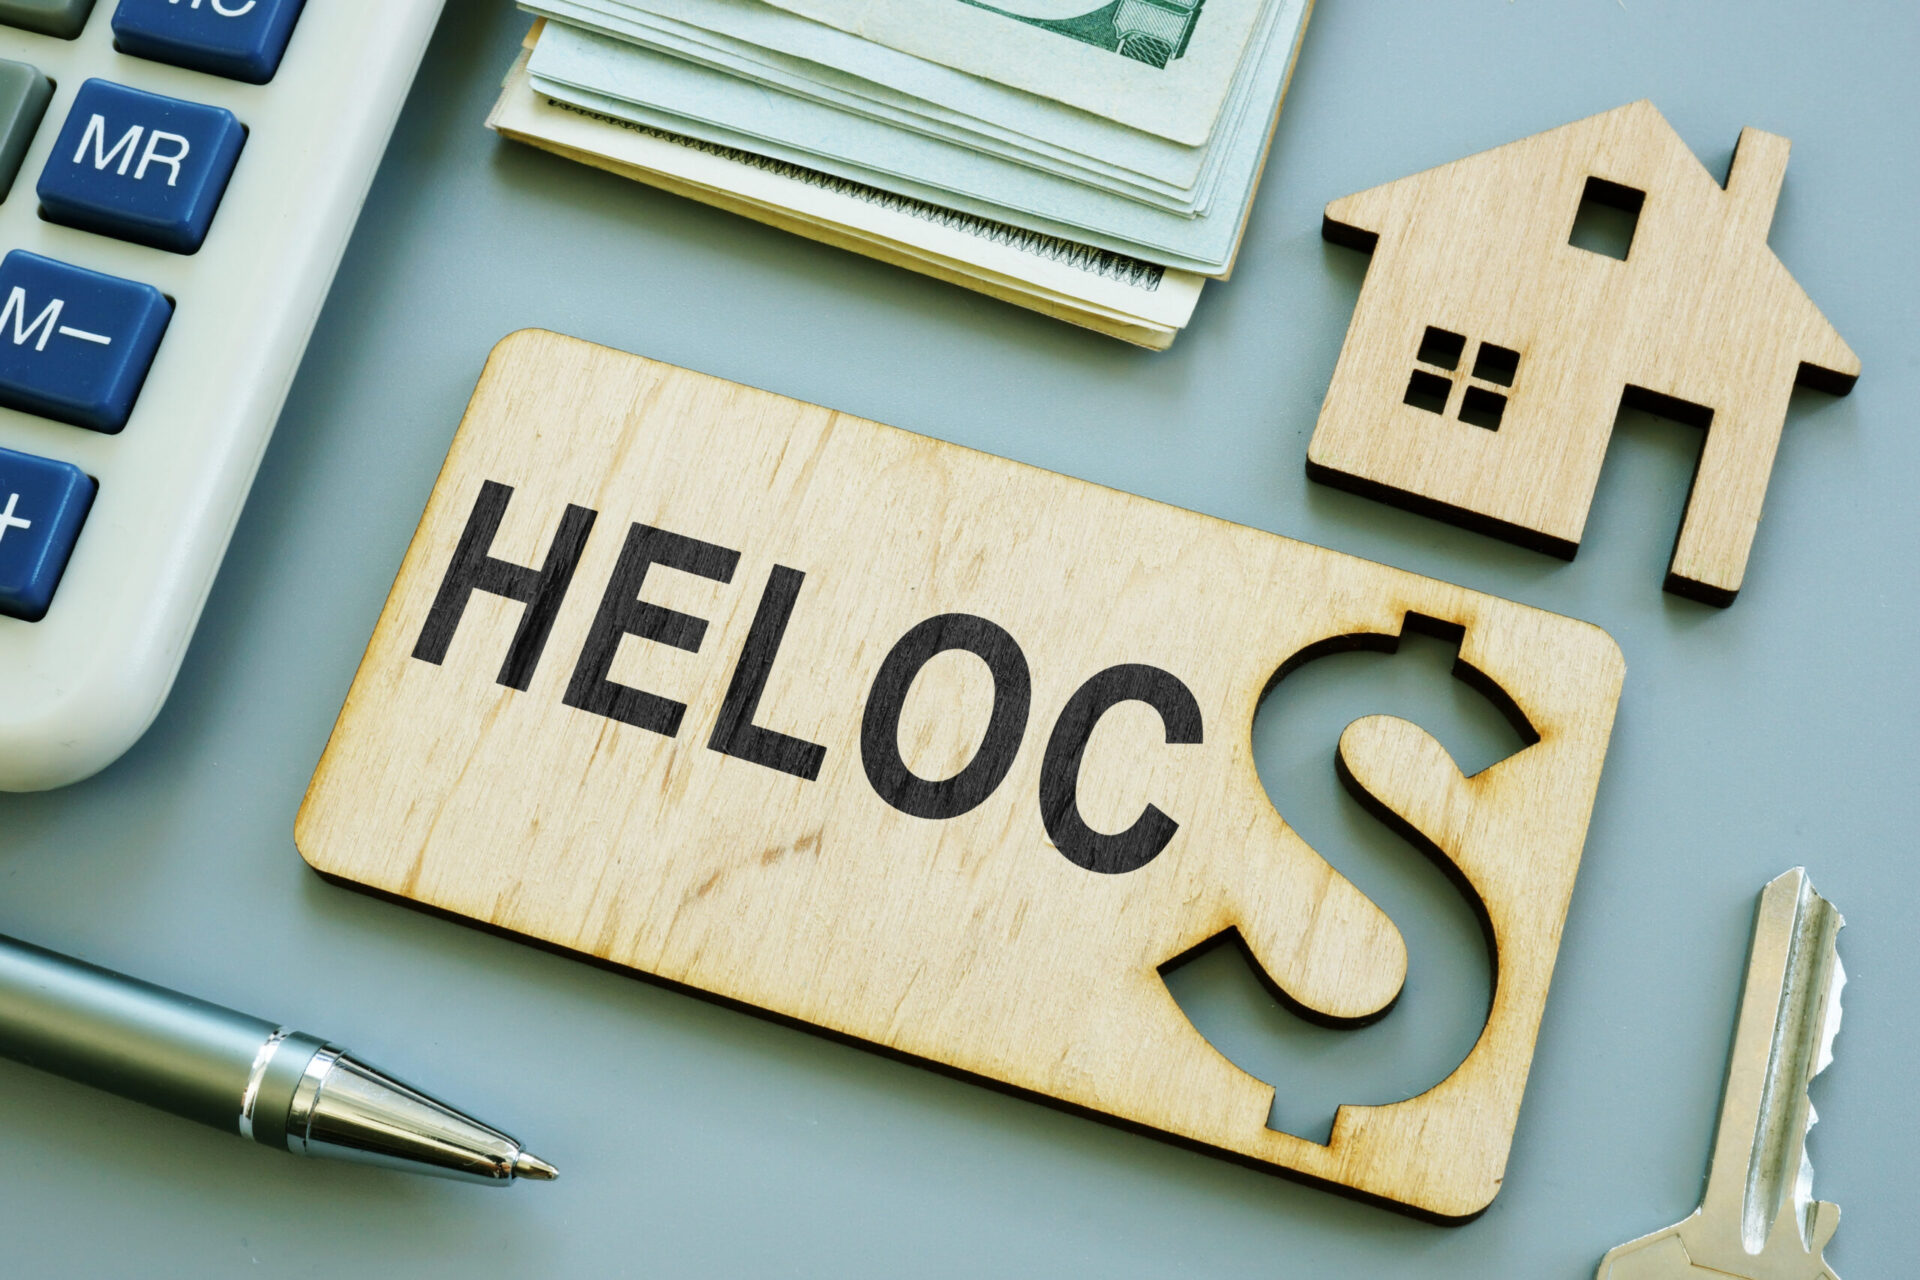 Movement And Homepoint Both Launch New HELOCs